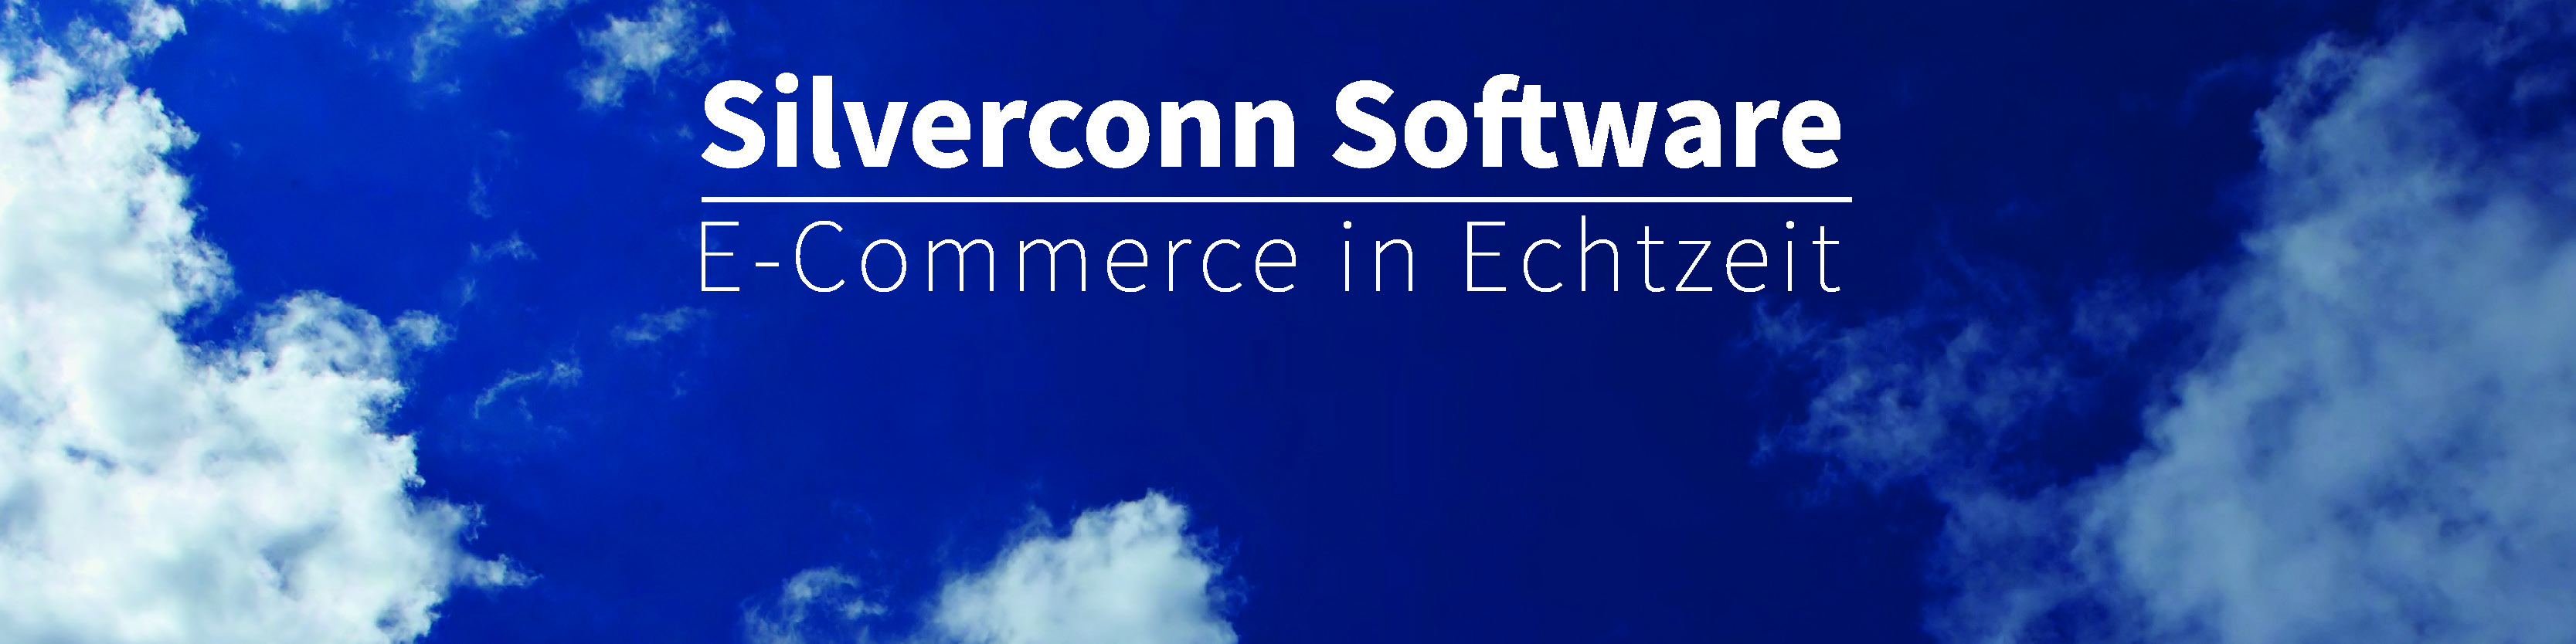 Silverconn Software | eCommerce und Realtime-Web